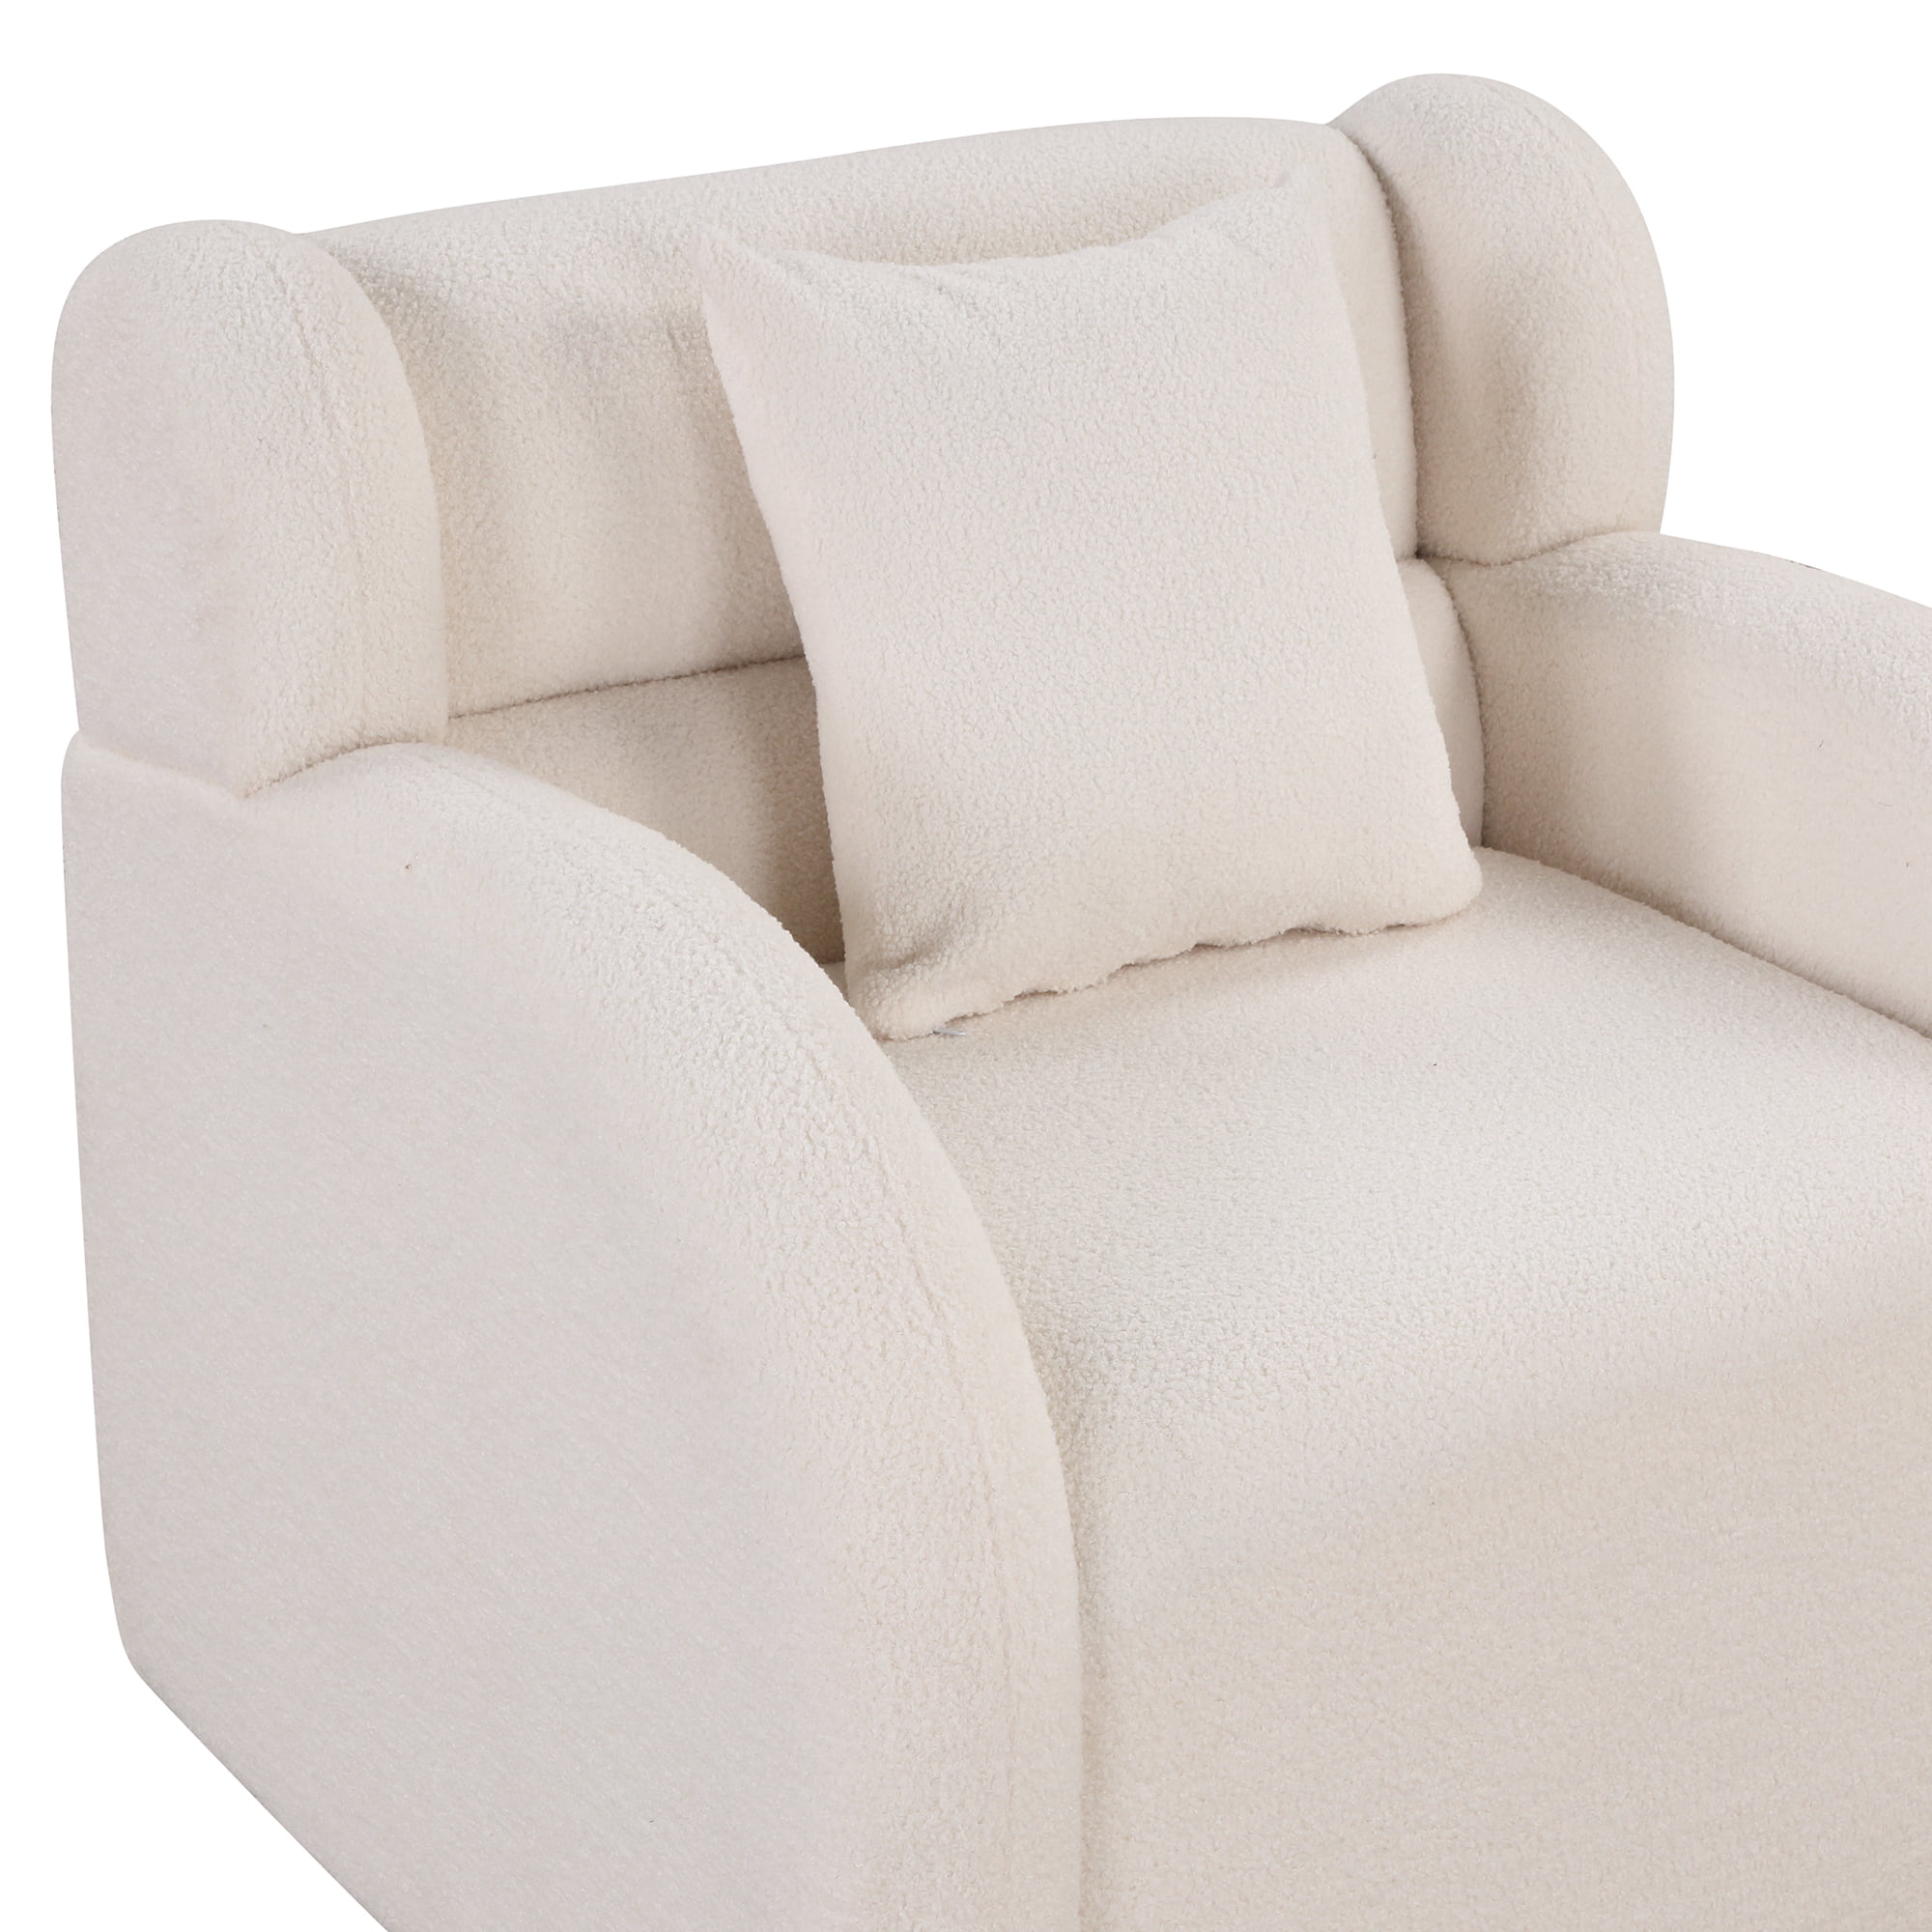 Swivel Accent Chair With Ottoman - WF303390AAK